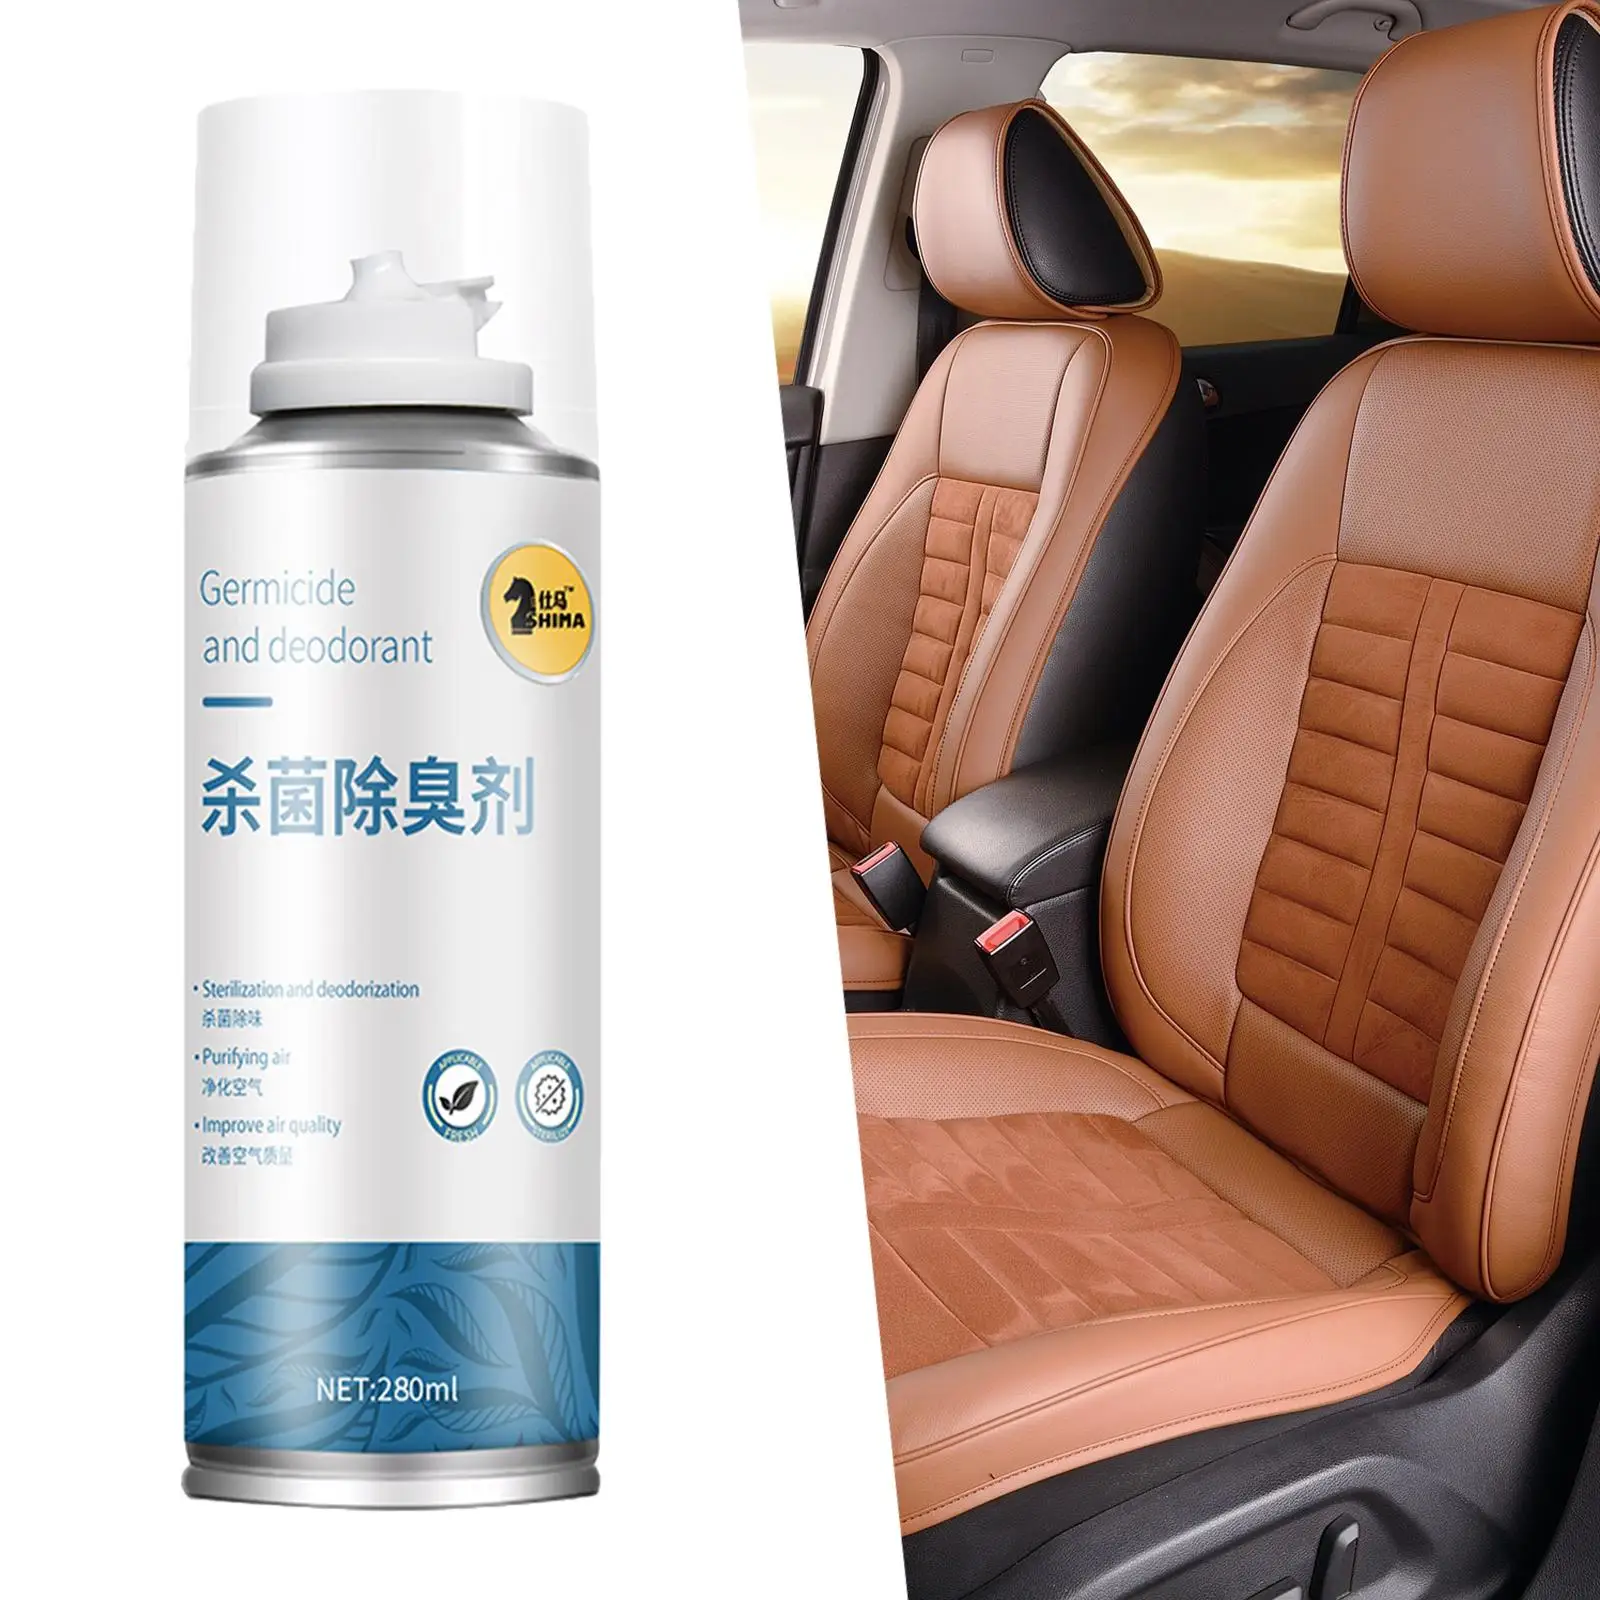 Car Air Fresheners Spray Renewal Scent Deodorant for Home Use Travel Office